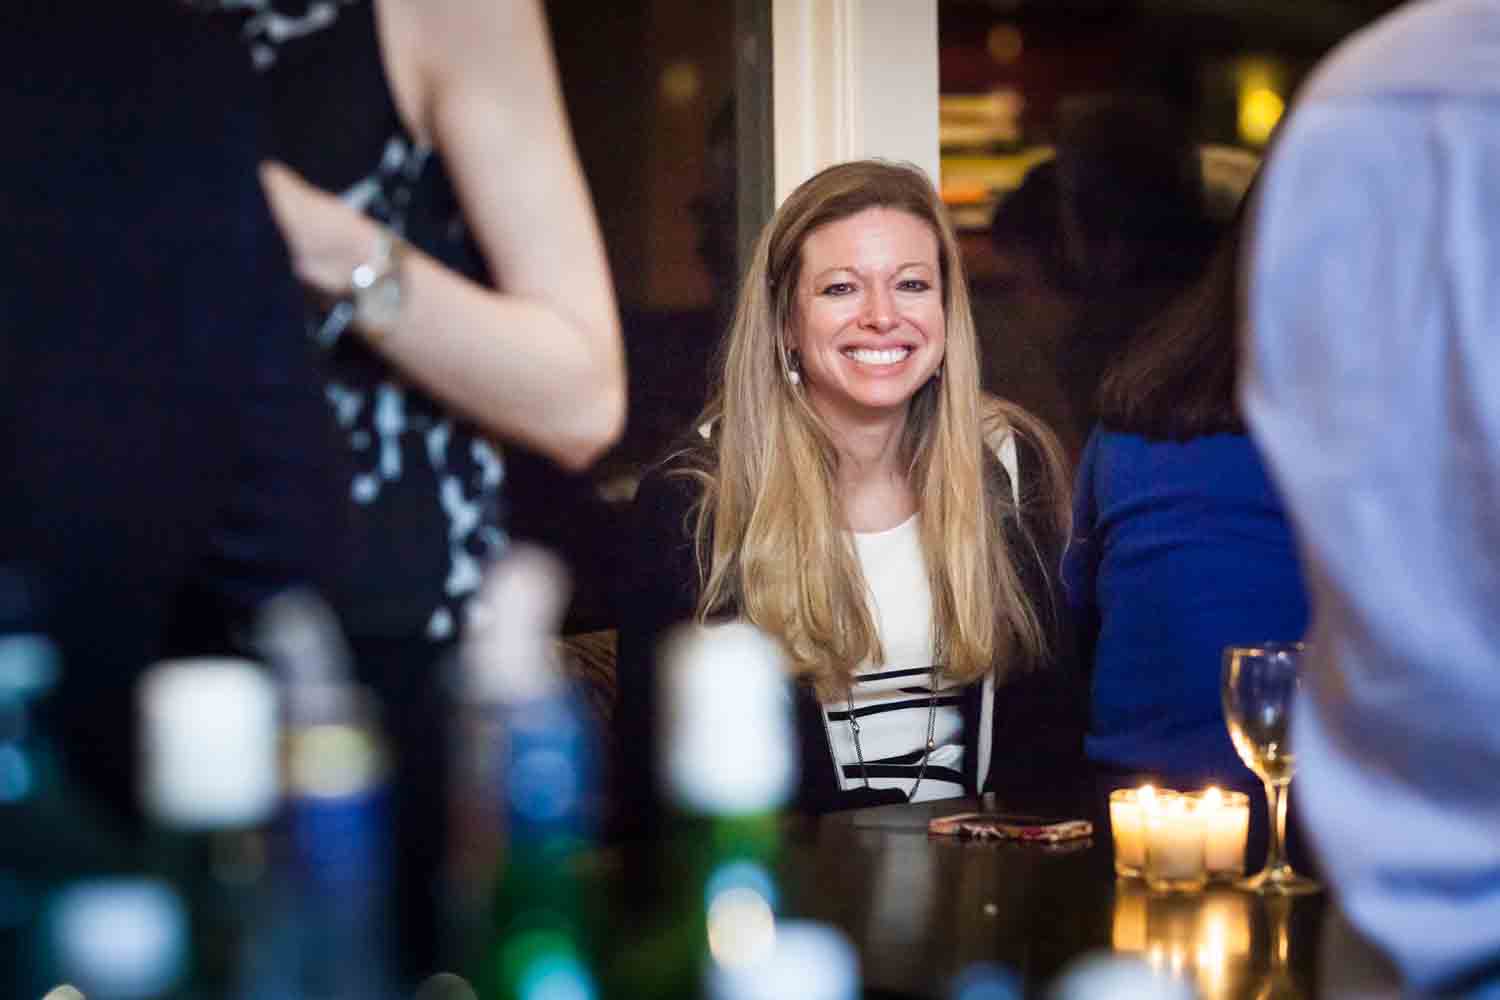 Birthday party photos of woman with blond hair smiling over bar